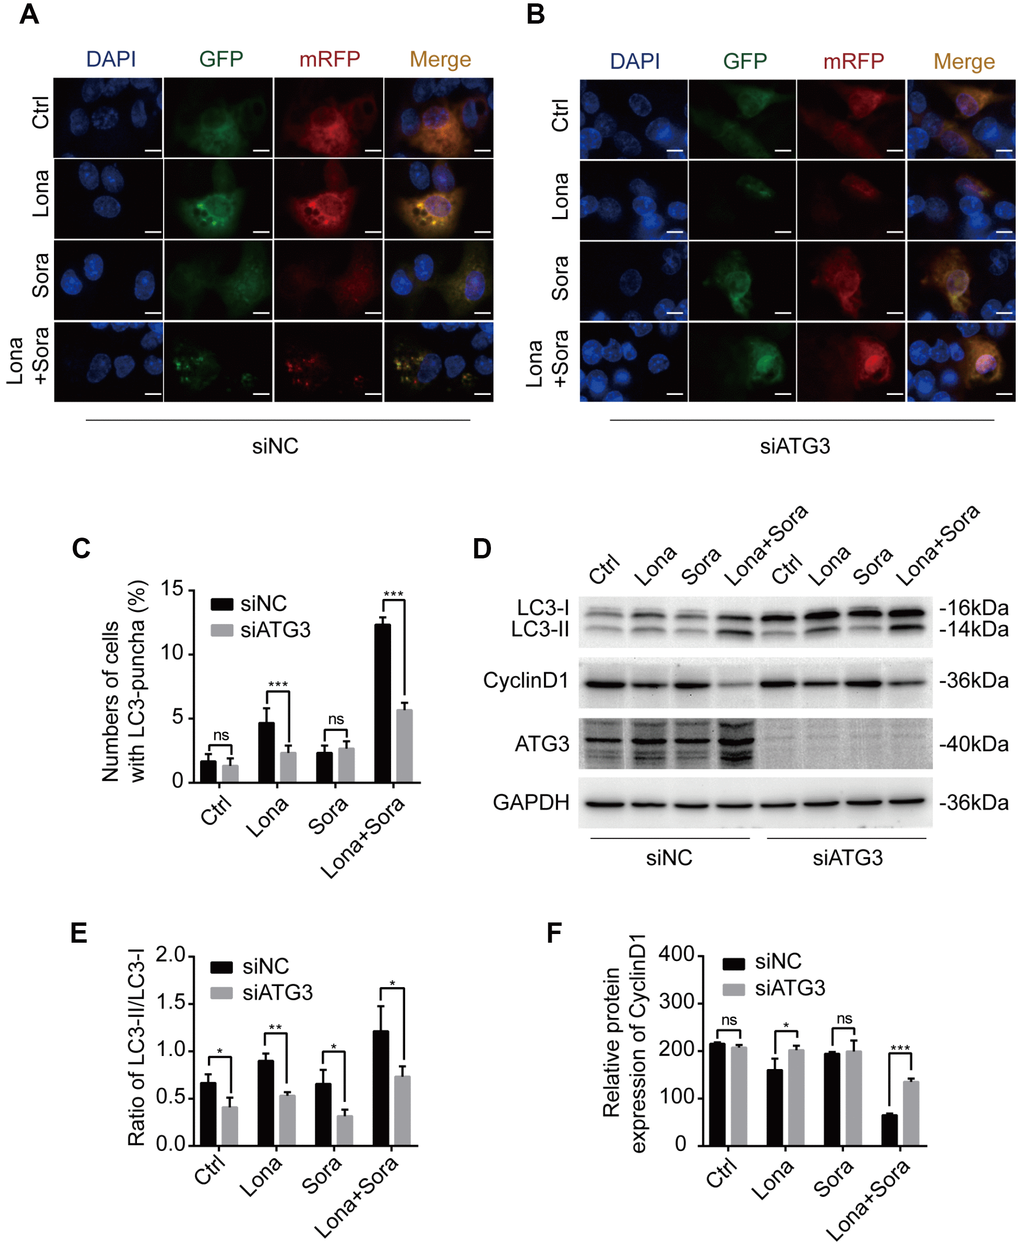 Knockdown of ATG3 attenuates the autophagic flux induced by lonafarnib and sorafenib co-treatment. (A) and (B) Detection of autophagic flux with the mRFP-GFP-LC3 reporter in HepG2 cells in response to siRNA treatments of negative control (NC) and ATG3 under a microscope. Scale bar = 10 μm. (C) Quantification of cells with LC3 puncta as indicated. ns, P > 0.05; ***P D) Western blot analysis was performed to detect changes in LC3B and cyclin D1 proteins in cells transfected with indicated siRNAs. (E) and (F) Ratio of the conversion of LC3B-I to LC3B-II (E) and expression of cyclin D1 (F). ns, P > 0.05; *P 